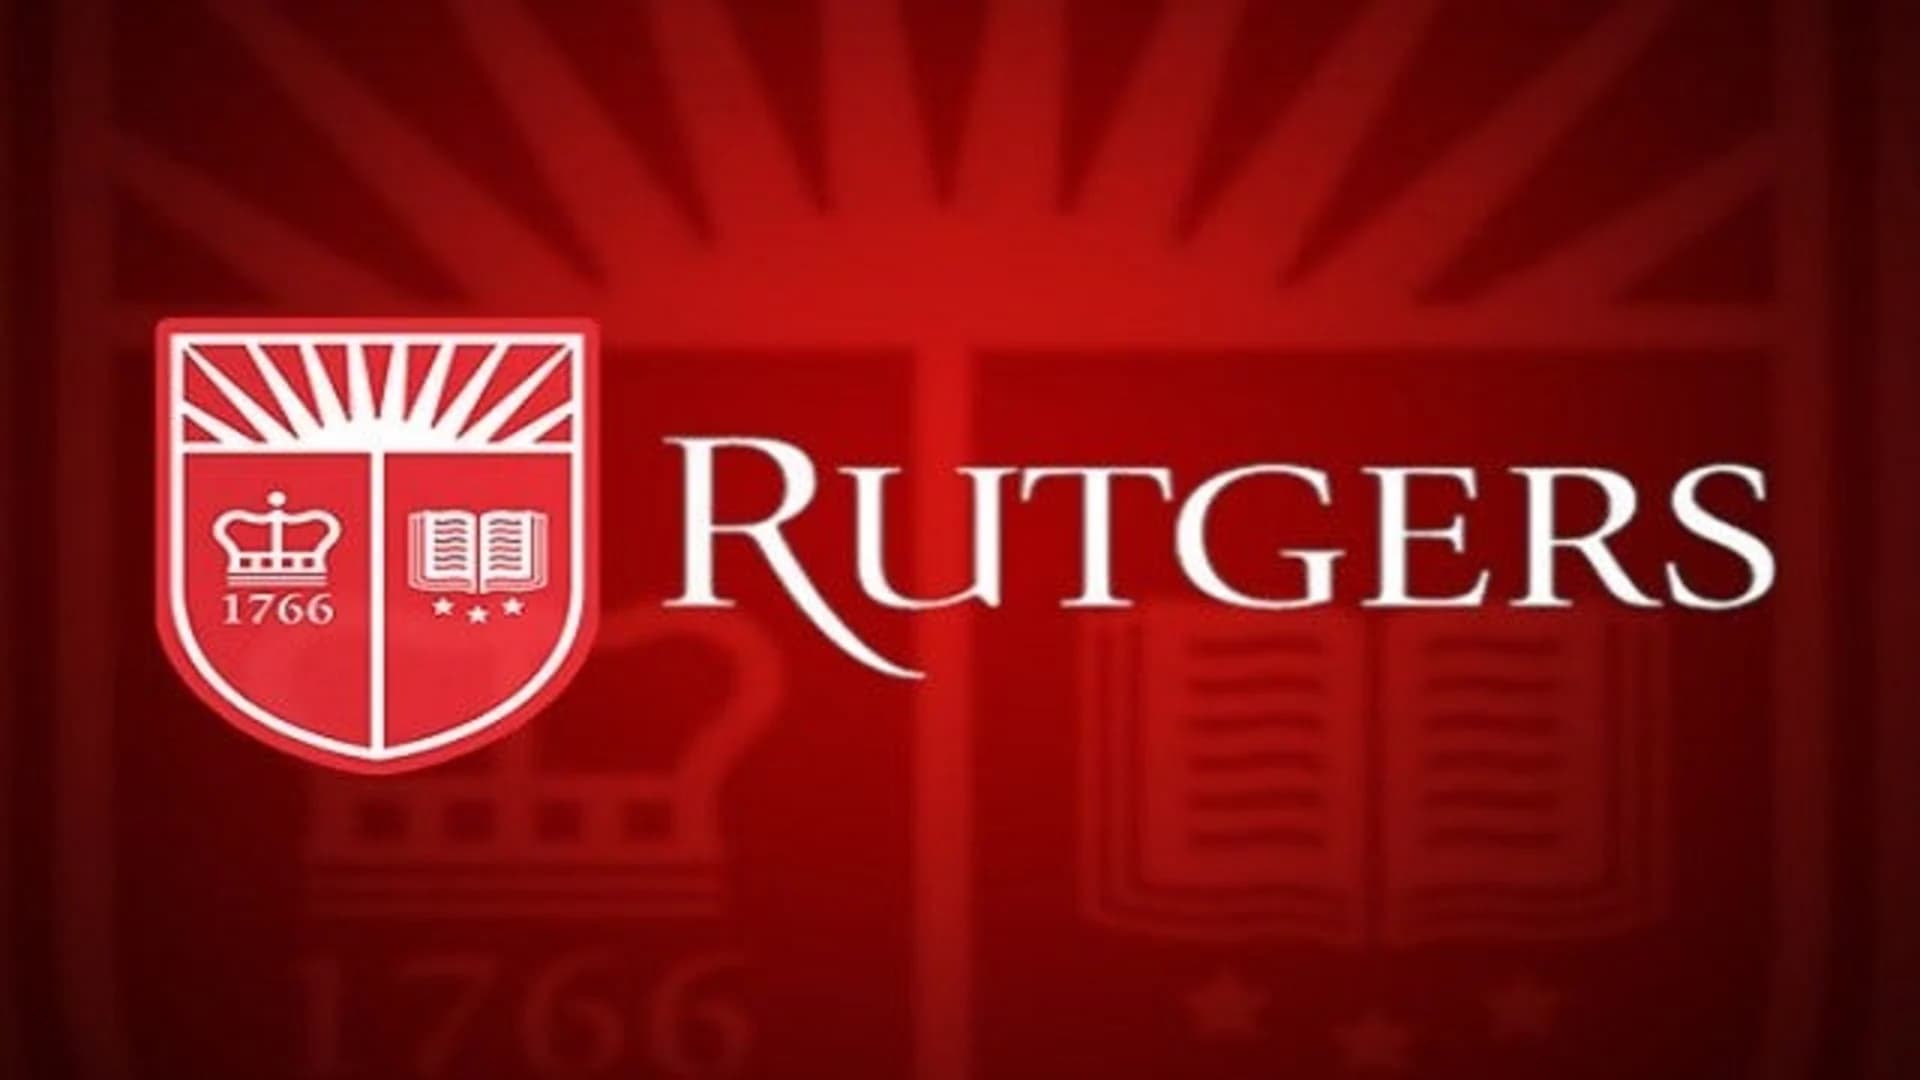 Rutgers professor accused of anti-Semitism removed from role